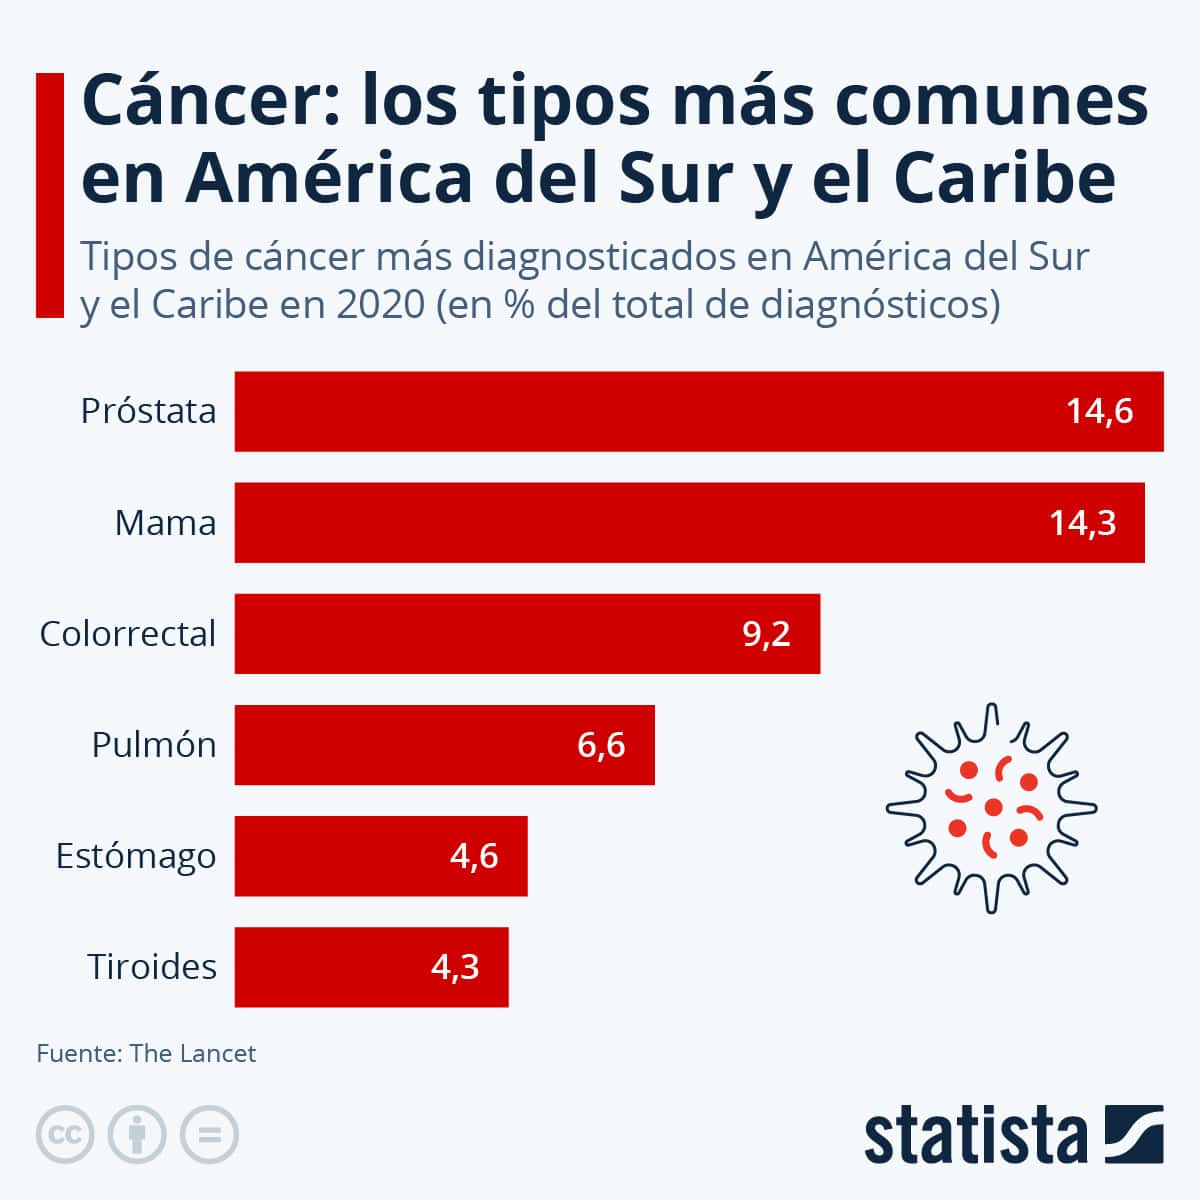 Cancer: most common types in South America and the Caribbean